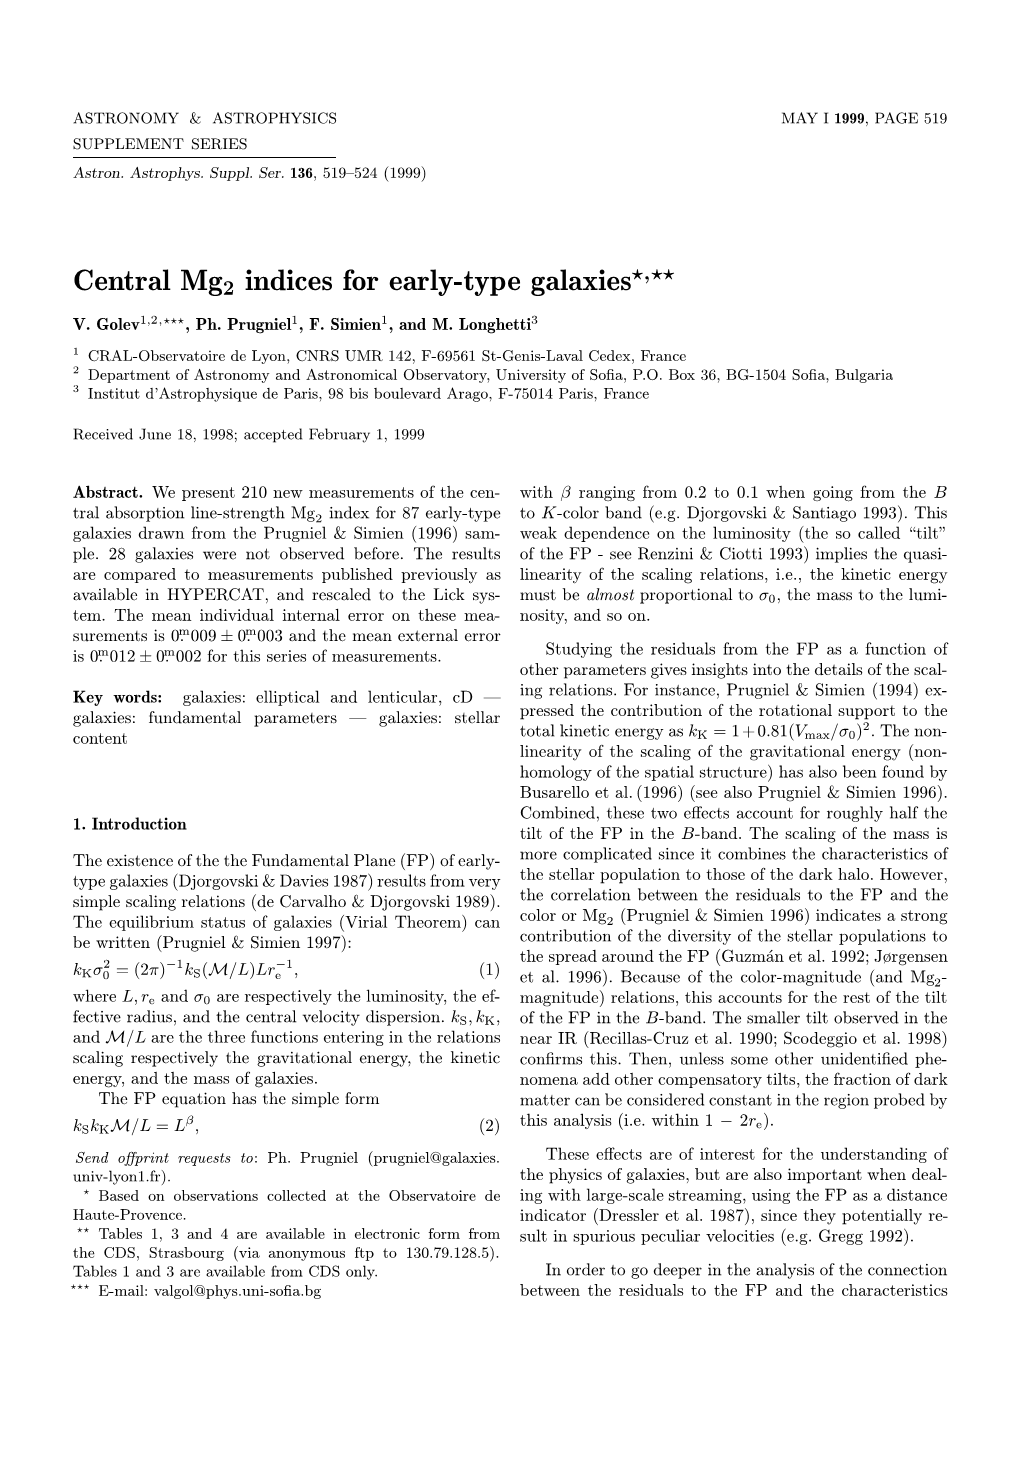 Central Mg2 Indices for Early-Type Galaxies